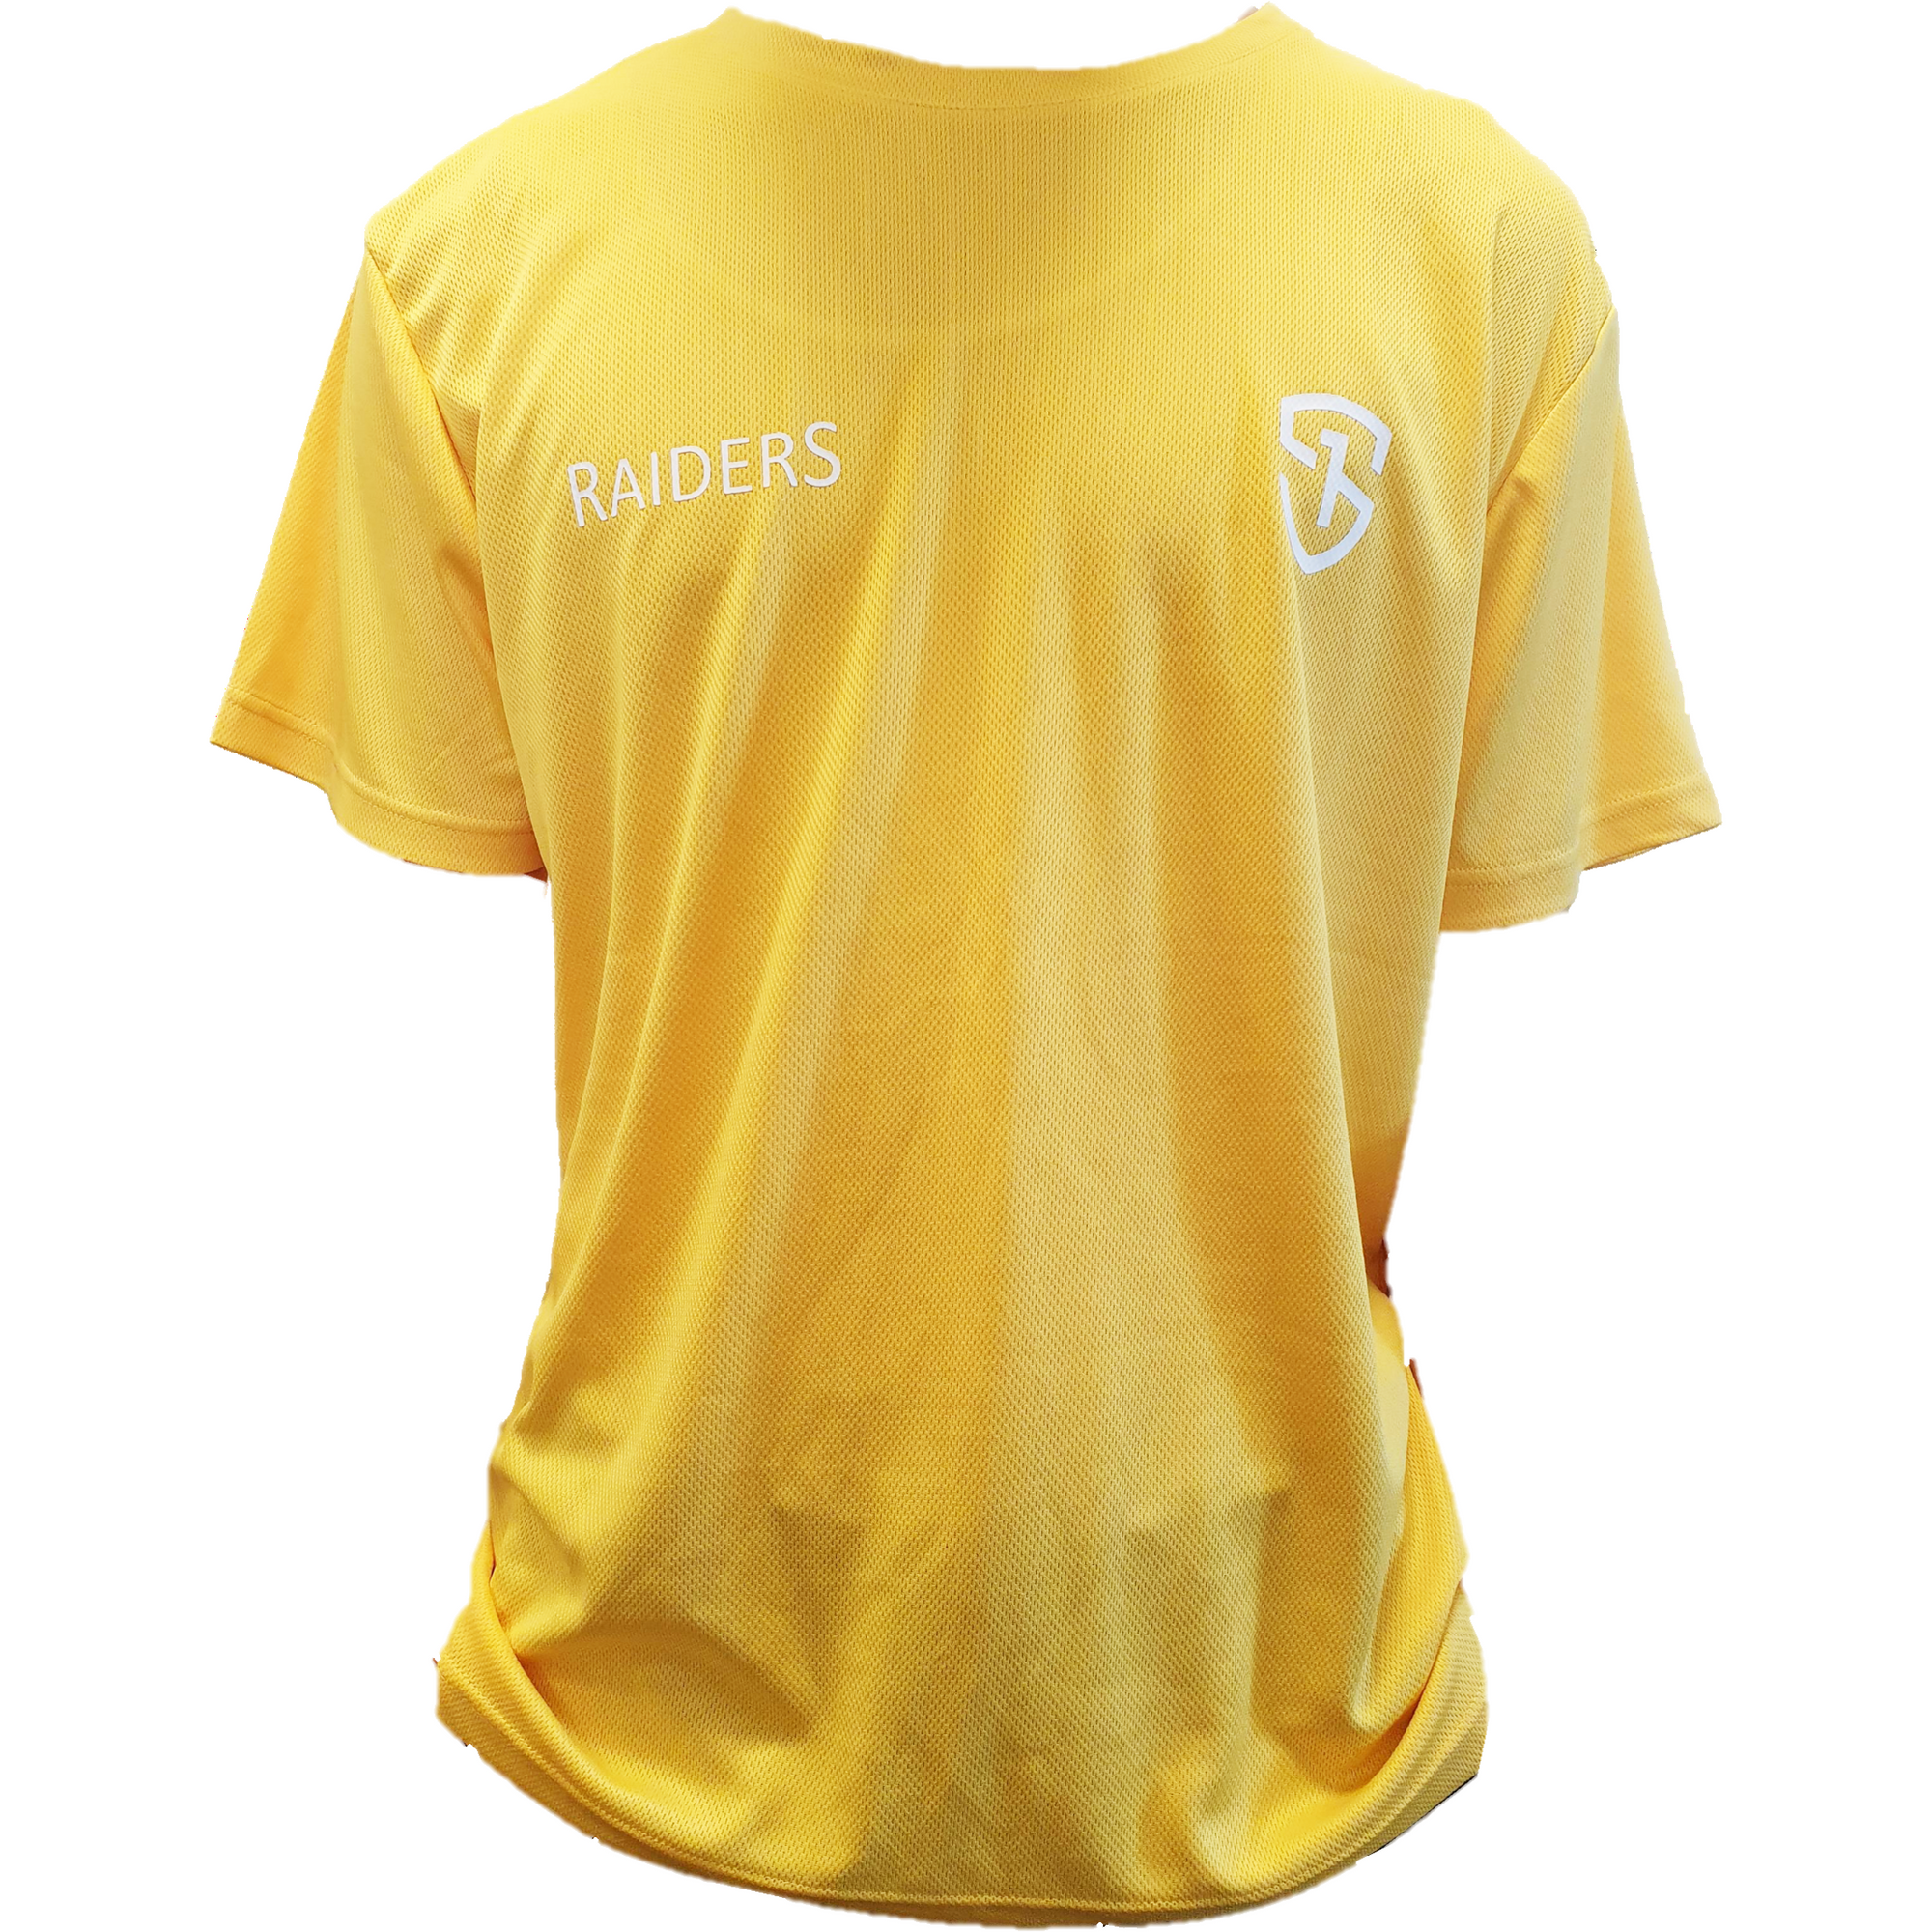 House Team Sports T-shirt Yellow Size 14